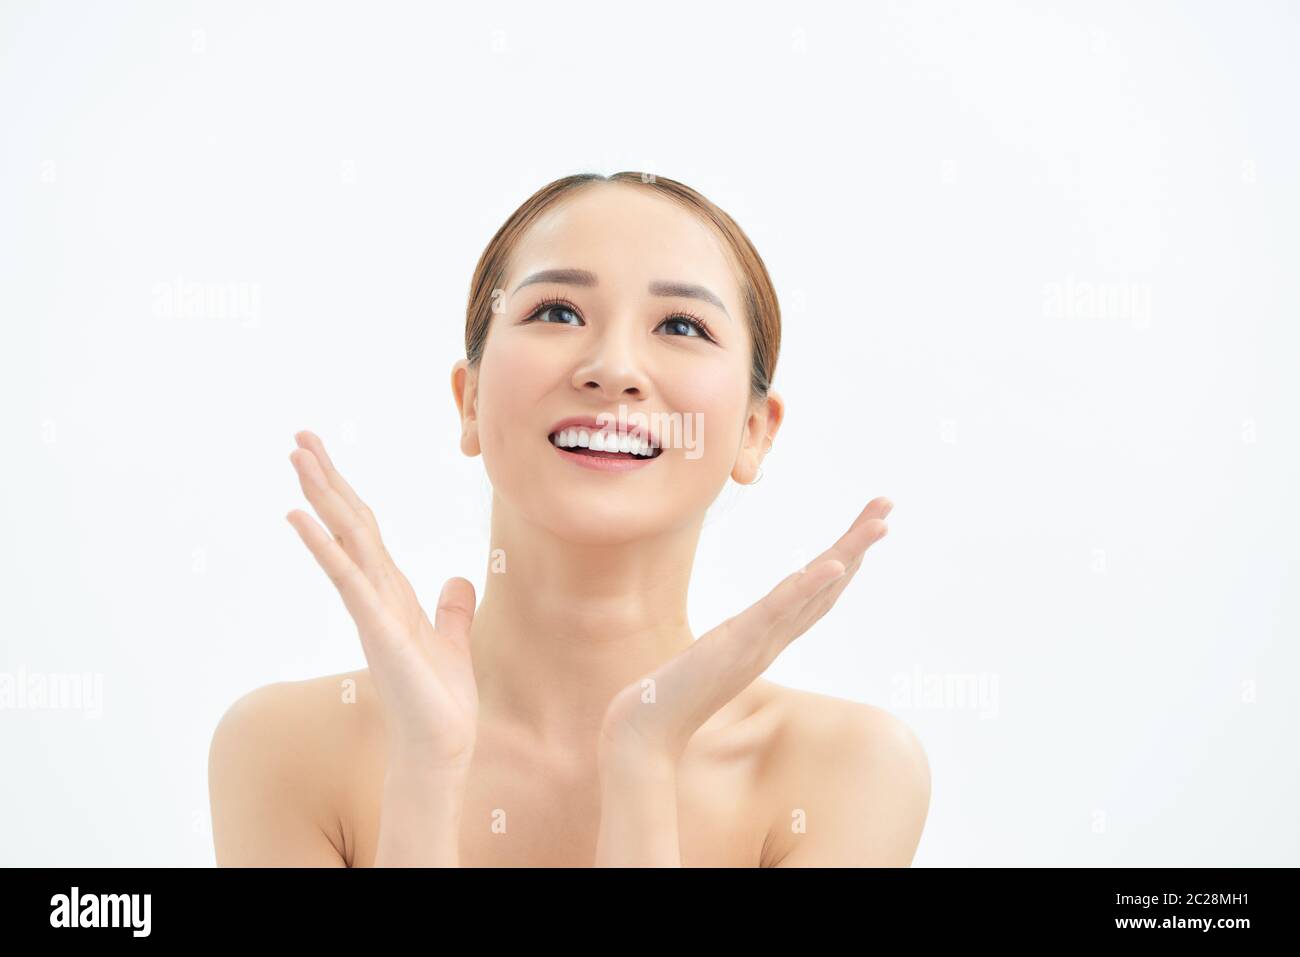 Beauty Spa Woman with perfect skin Portrait. Spa and skincare. Stock Photo